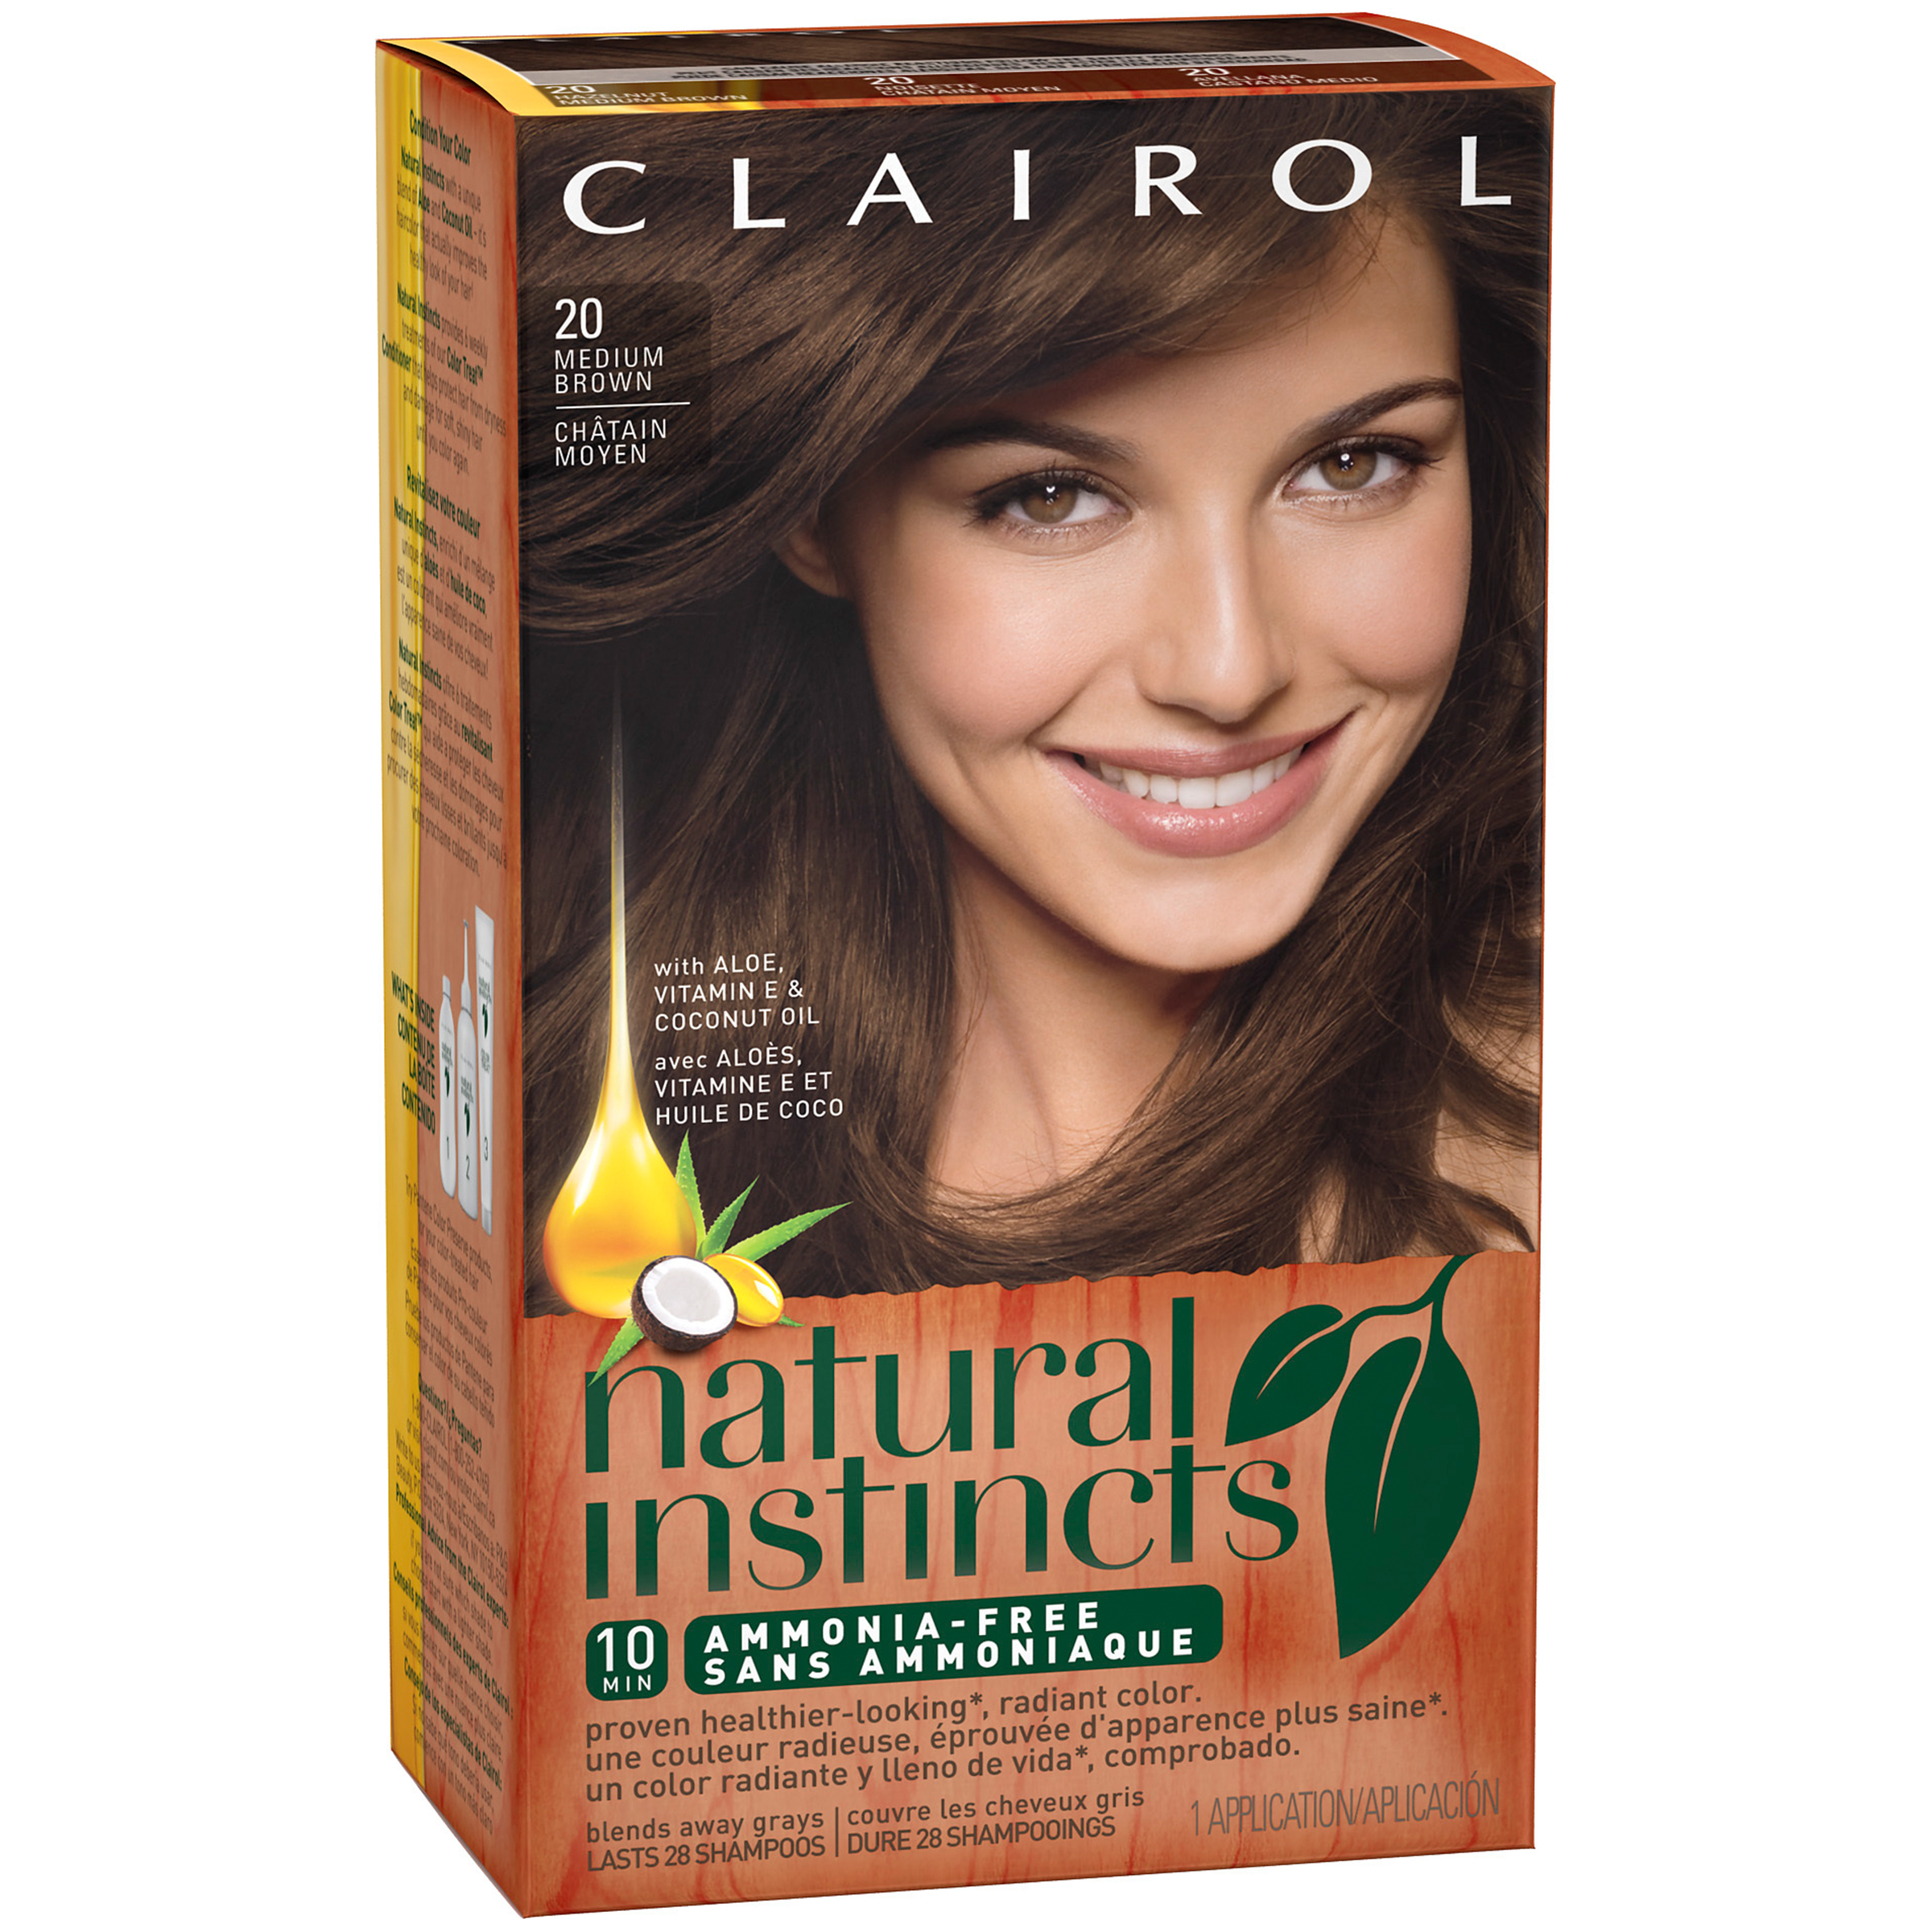 Clairol Natural Instincts Hair Color Kit